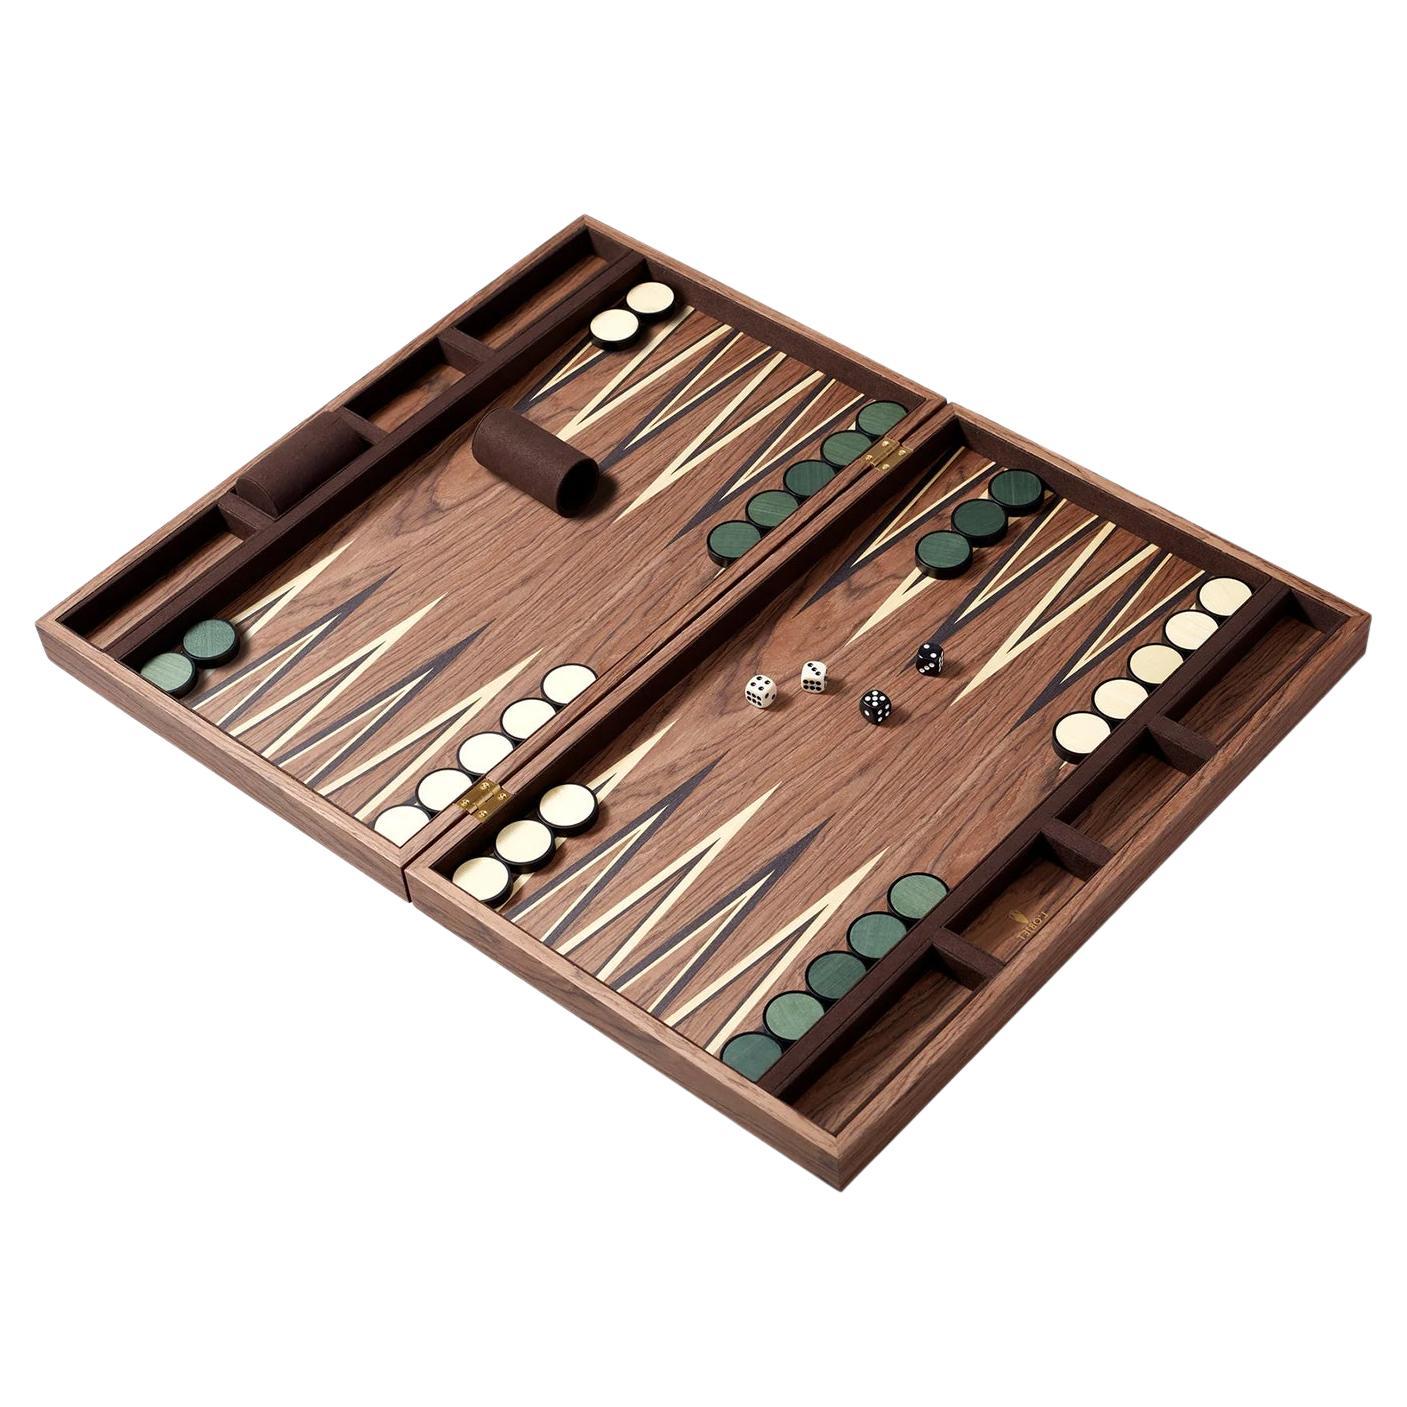 What size is a professional backgammon board?